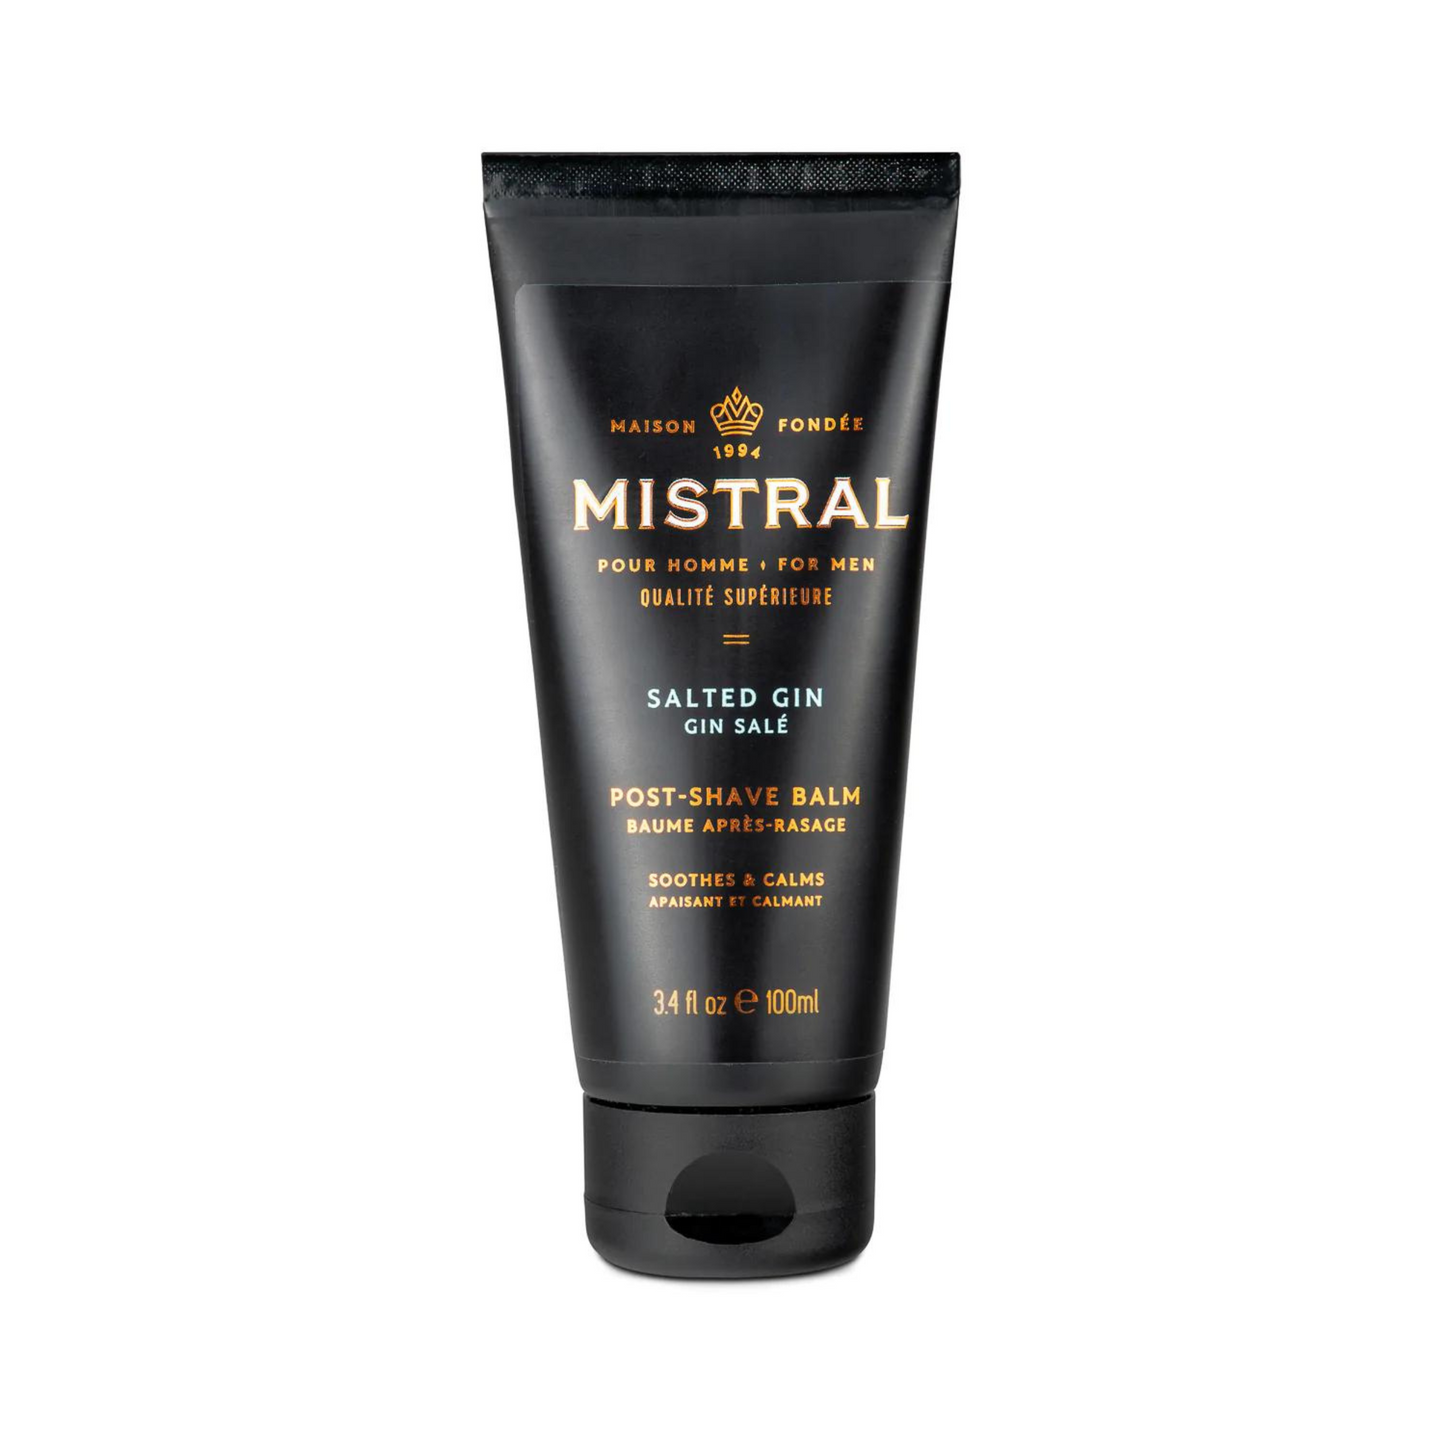 Primary Image of Mistral Salted Gin Post-Shave Balm (3.4 fl oz)